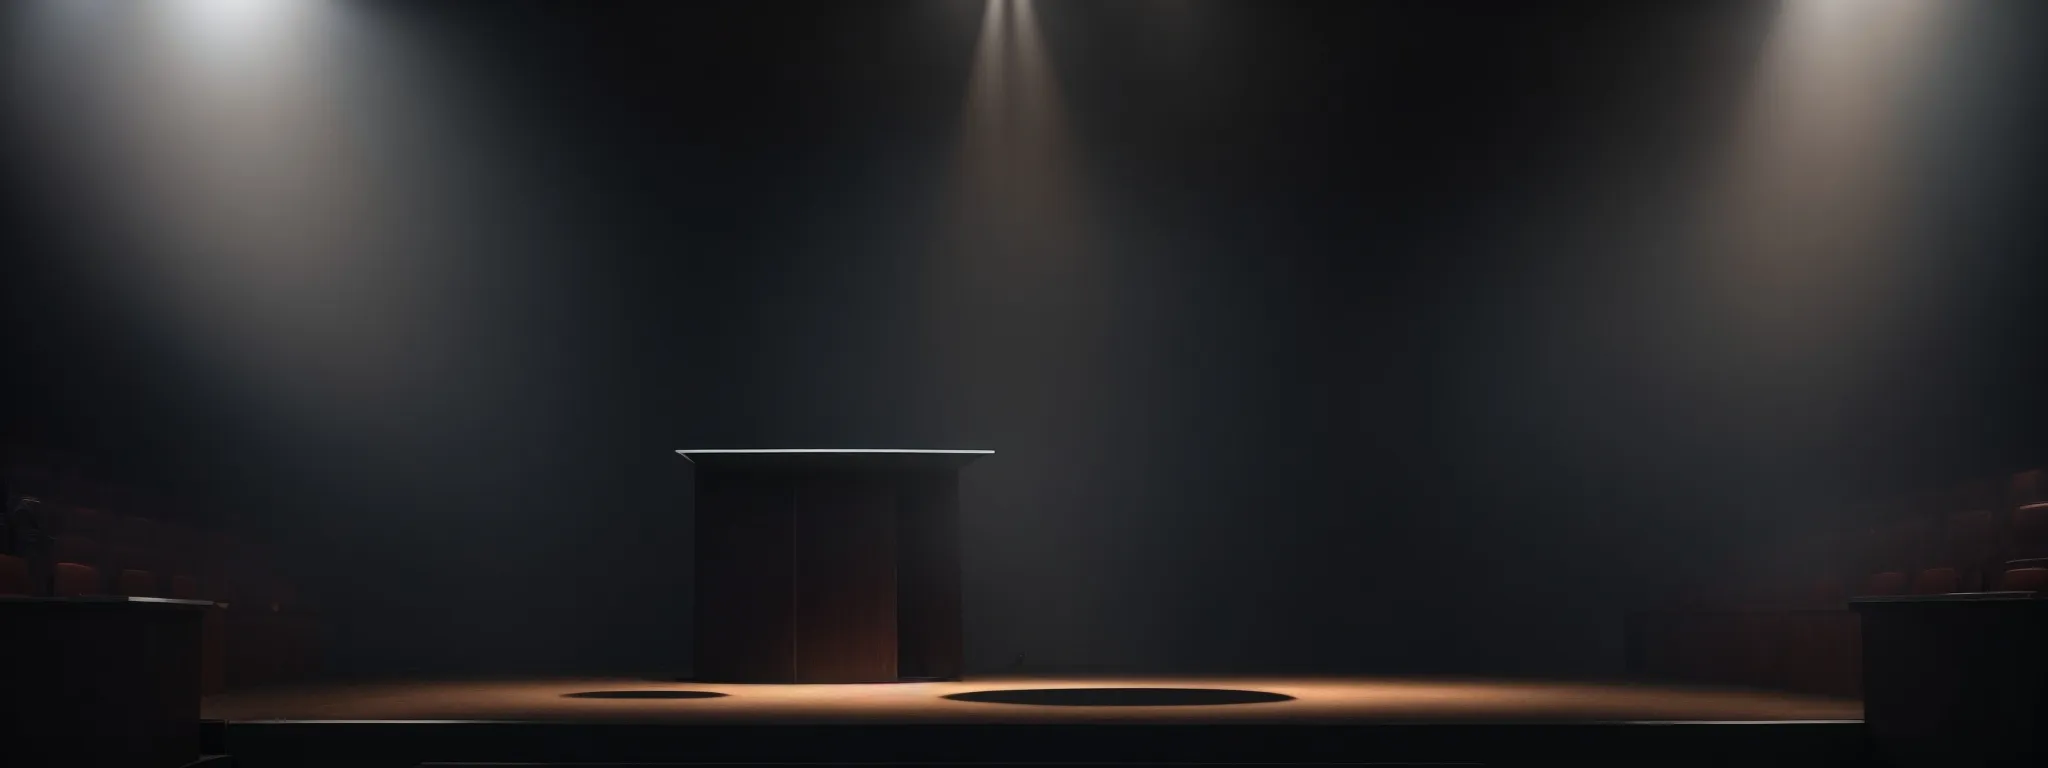 a spotlight illuminates a podium with a blank, prominent billboard in the background, setting the stage for a brand announcement.